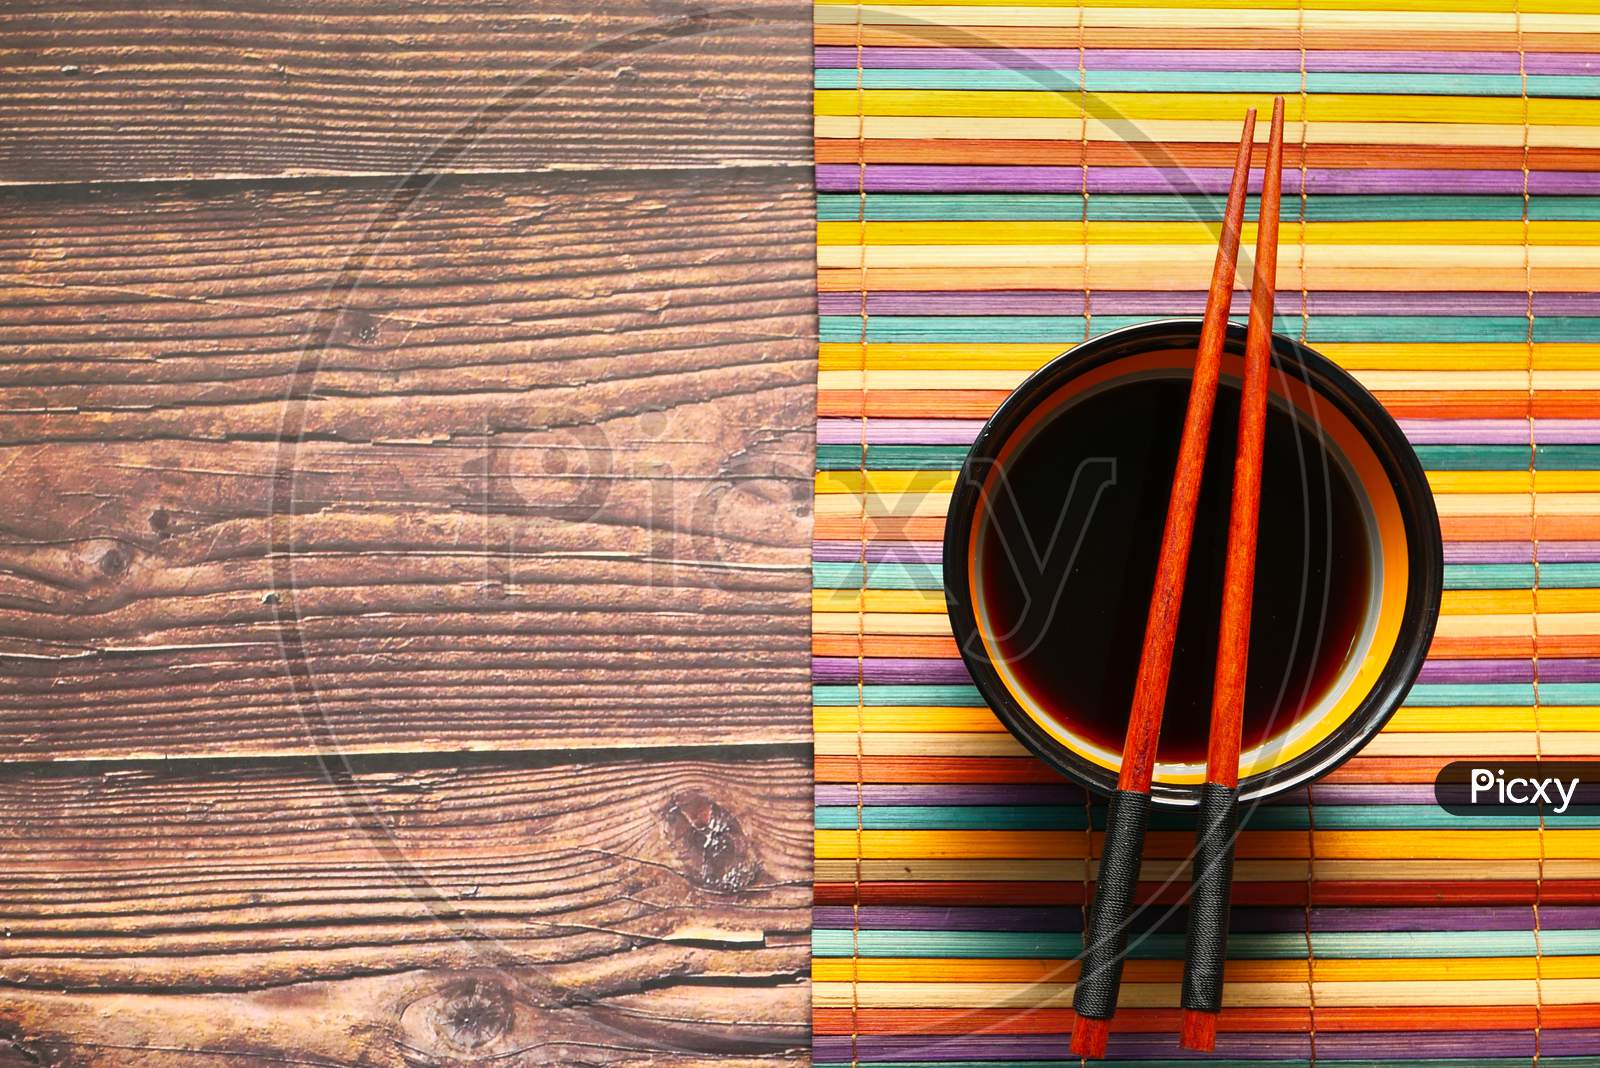 Japanese Food Cooking Set With Soy Sauce, Bamboo Sticks On Wooden Table.